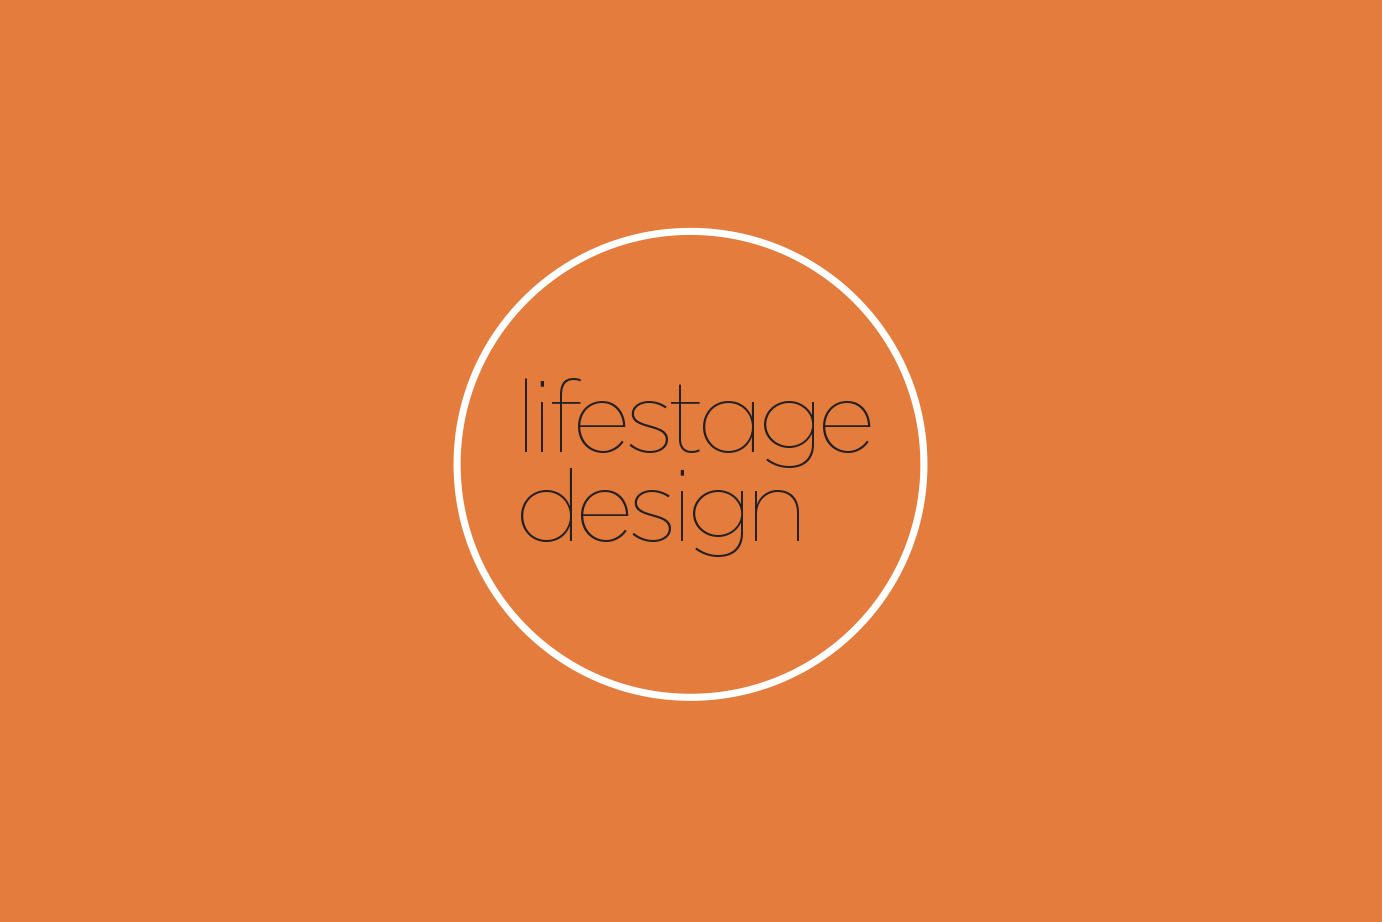 Lifestage Design™ puts life at the centre of every brief to create inspiring and nourishing spaces you can enjoy over many chapters, not just one.